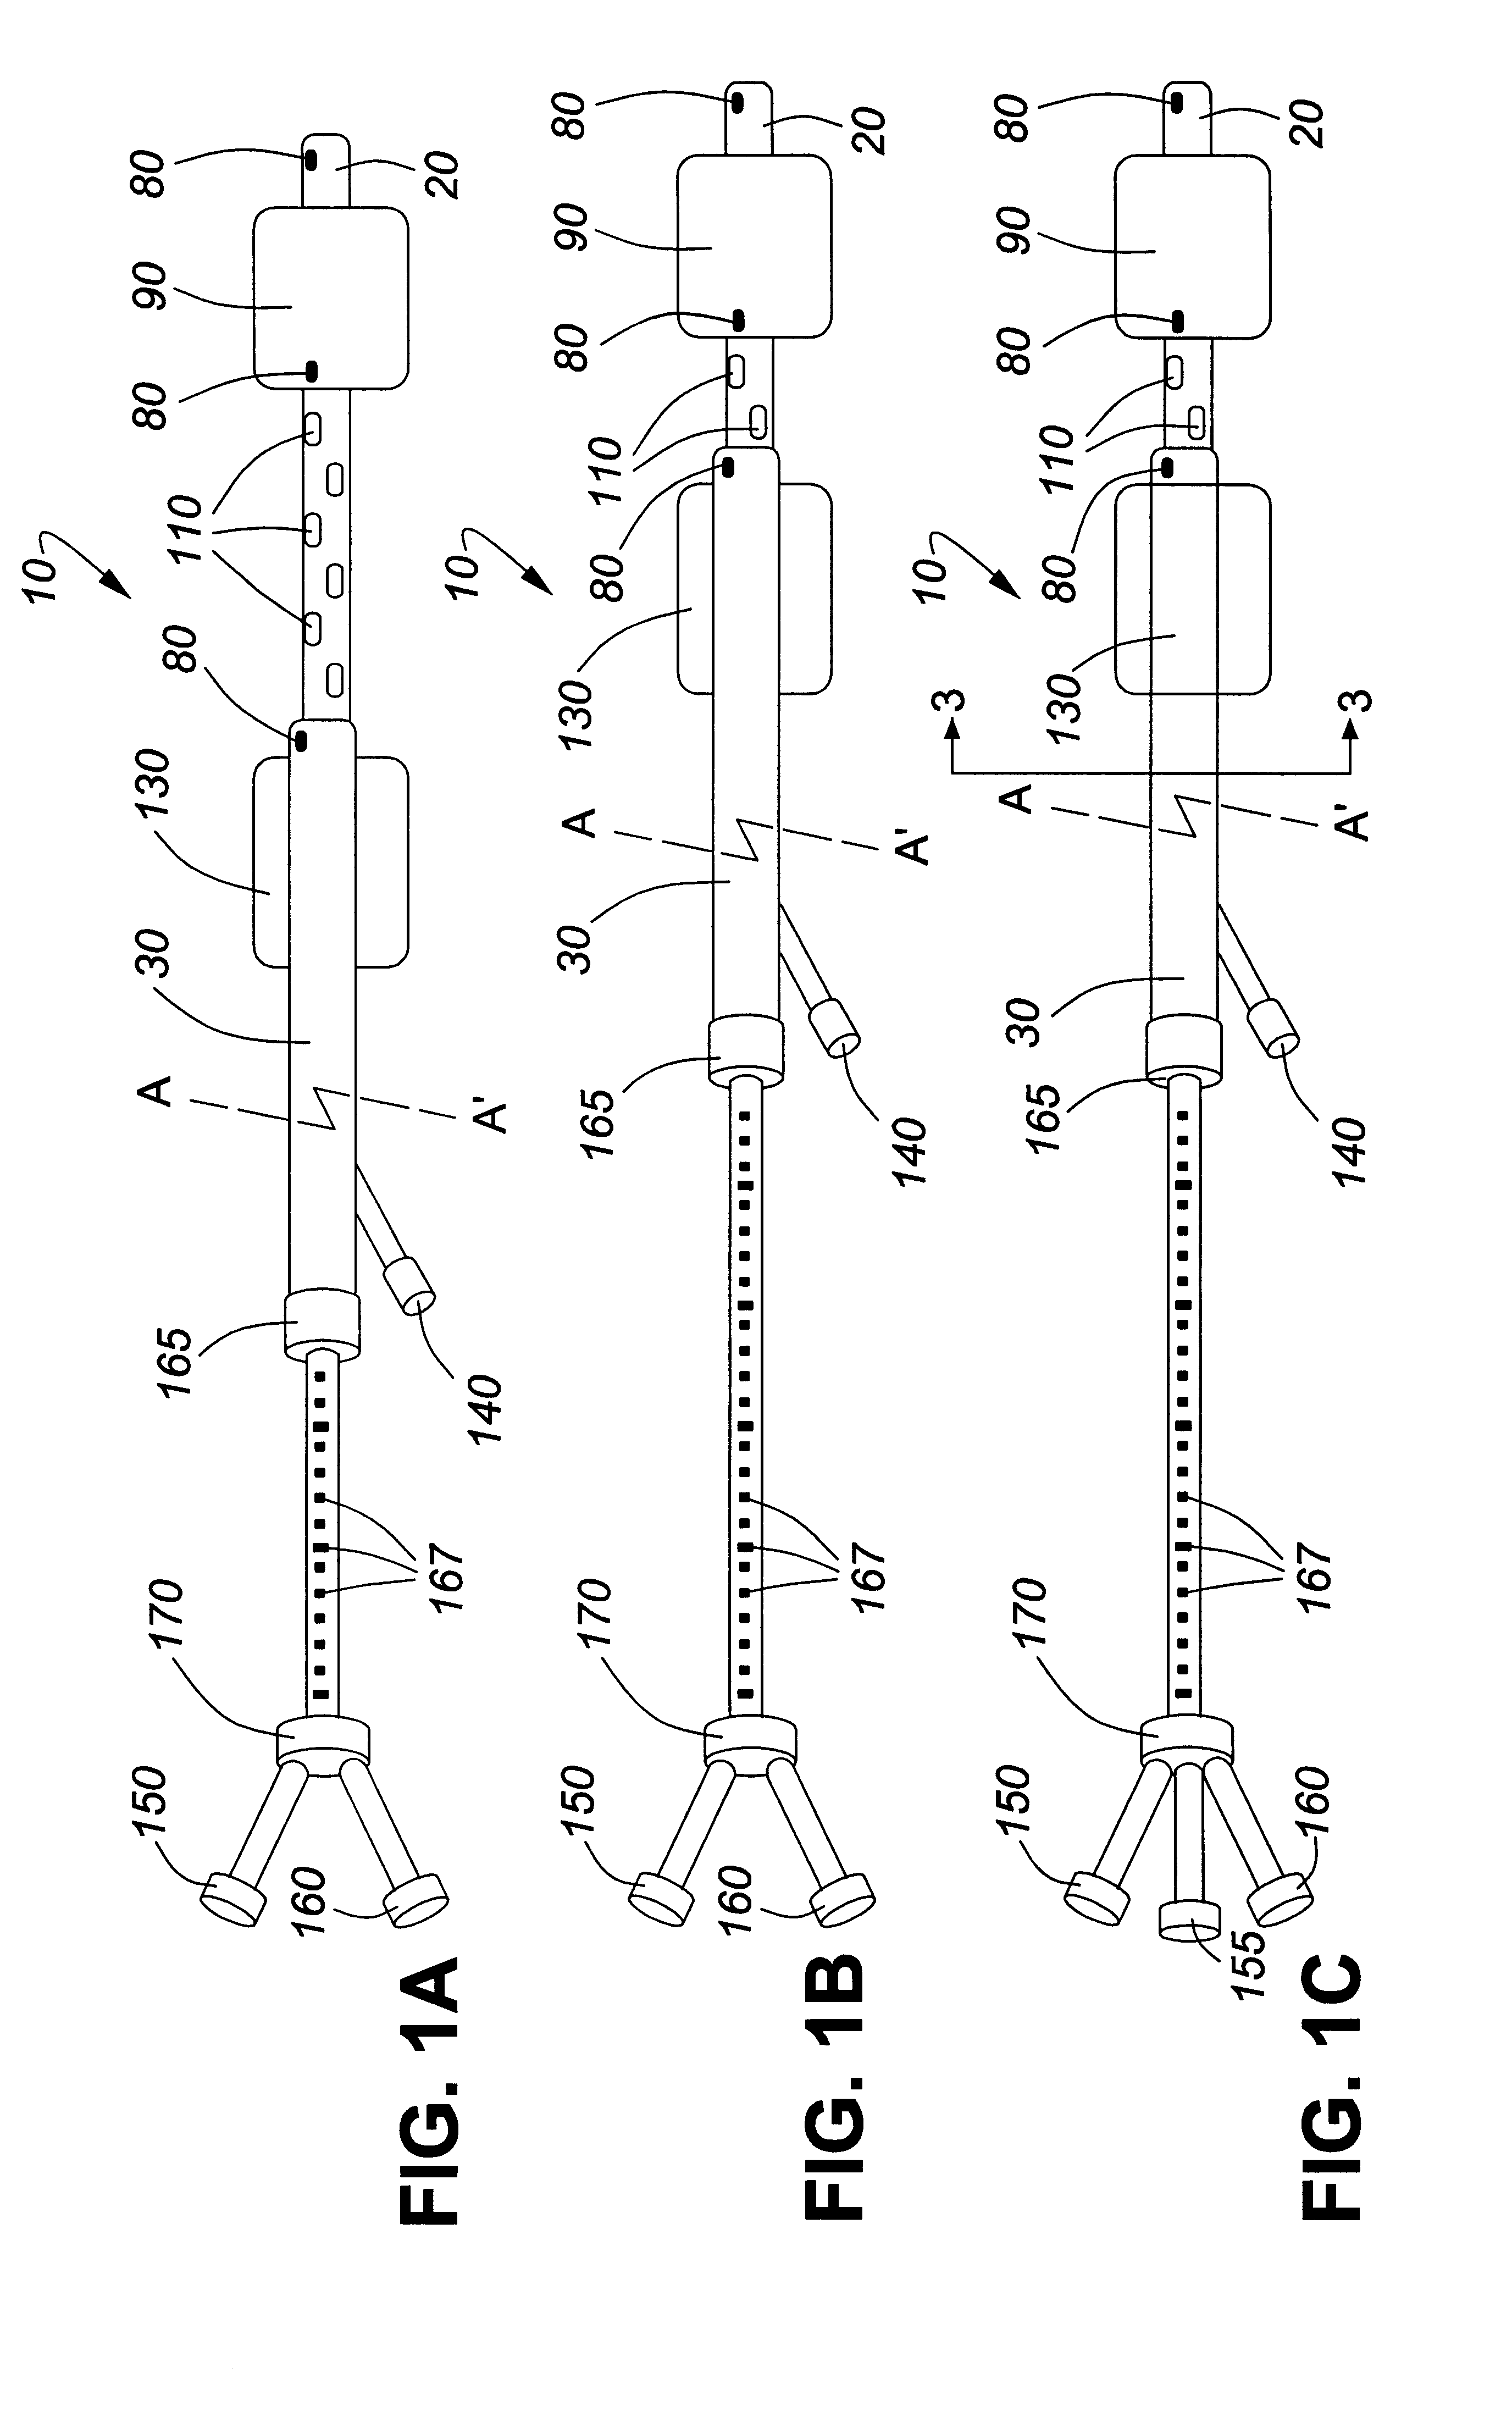 Adjustable multi-balloon local delivery device